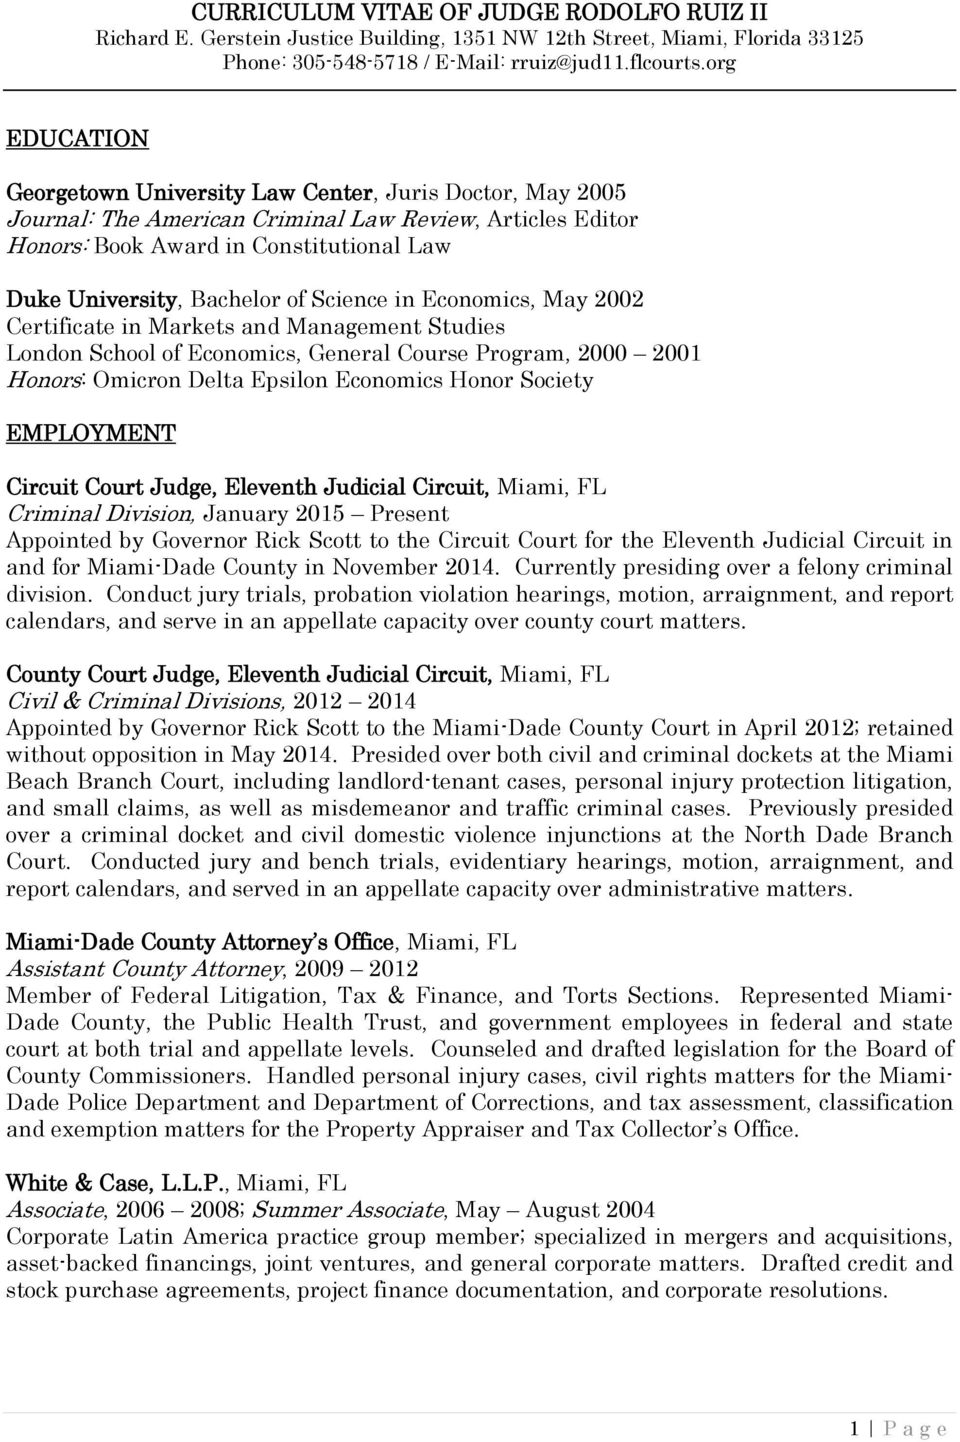 EMPLOYMENT Circuit Court Judge, Eleventh Judicial Circuit, Miami, FL Criminal Division, January 2015 Present Appointed by Governor Rick Scott to the Circuit Court for the Eleventh Judicial Circuit in